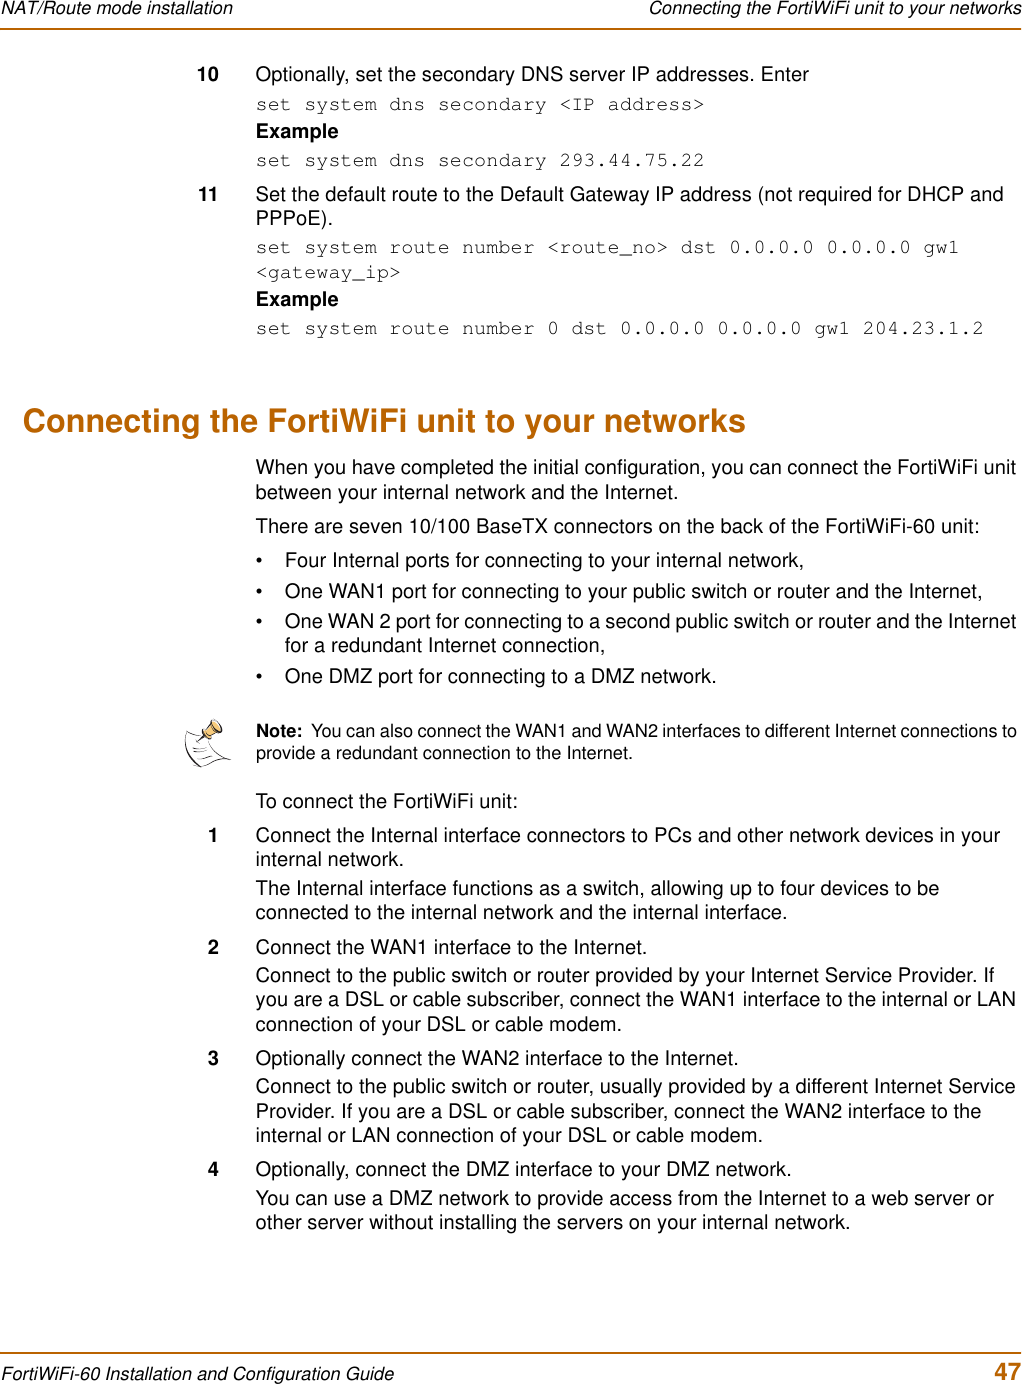 NAT/Route mode installation  Connecting the FortiWiFi unit to your networksFortiWiFi-60 Installation and Configuration Guide  4710 Optionally, set the secondary DNS server IP addresses. Enterset system dns secondary &lt;IP address&gt;Exampleset system dns secondary 293.44.75.2211 Set the default route to the Default Gateway IP address (not required for DHCP and PPPoE).set system route number &lt;route_no&gt; dst 0.0.0.0 0.0.0.0 gw1 &lt;gateway_ip&gt;Exampleset system route number 0 dst 0.0.0.0 0.0.0.0 gw1 204.23.1.2Connecting the FortiWiFi unit to your networksWhen you have completed the initial configuration, you can connect the FortiWiFi unit between your internal network and the Internet.There are seven 10/100 BaseTX connectors on the back of the FortiWiFi-60 unit:• Four Internal ports for connecting to your internal network,• One WAN1 port for connecting to your public switch or router and the Internet,• One WAN 2 port for connecting to a second public switch or router and the Internet for a redundant Internet connection,• One DMZ port for connecting to a DMZ network.To connect the FortiWiFi unit:1Connect the Internal interface connectors to PCs and other network devices in your internal network.The Internal interface functions as a switch, allowing up to four devices to be connected to the internal network and the internal interface.2Connect the WAN1 interface to the Internet.Connect to the public switch or router provided by your Internet Service Provider. If you are a DSL or cable subscriber, connect the WAN1 interface to the internal or LAN connection of your DSL or cable modem.3Optionally connect the WAN2 interface to the Internet.Connect to the public switch or router, usually provided by a different Internet Service Provider. If you are a DSL or cable subscriber, connect the WAN2 interface to the internal or LAN connection of your DSL or cable modem.4Optionally, connect the DMZ interface to your DMZ network.You can use a DMZ network to provide access from the Internet to a web server or other server without installing the servers on your internal network.Note:  You can also connect the WAN1 and WAN2 interfaces to different Internet connections to provide a redundant connection to the Internet.